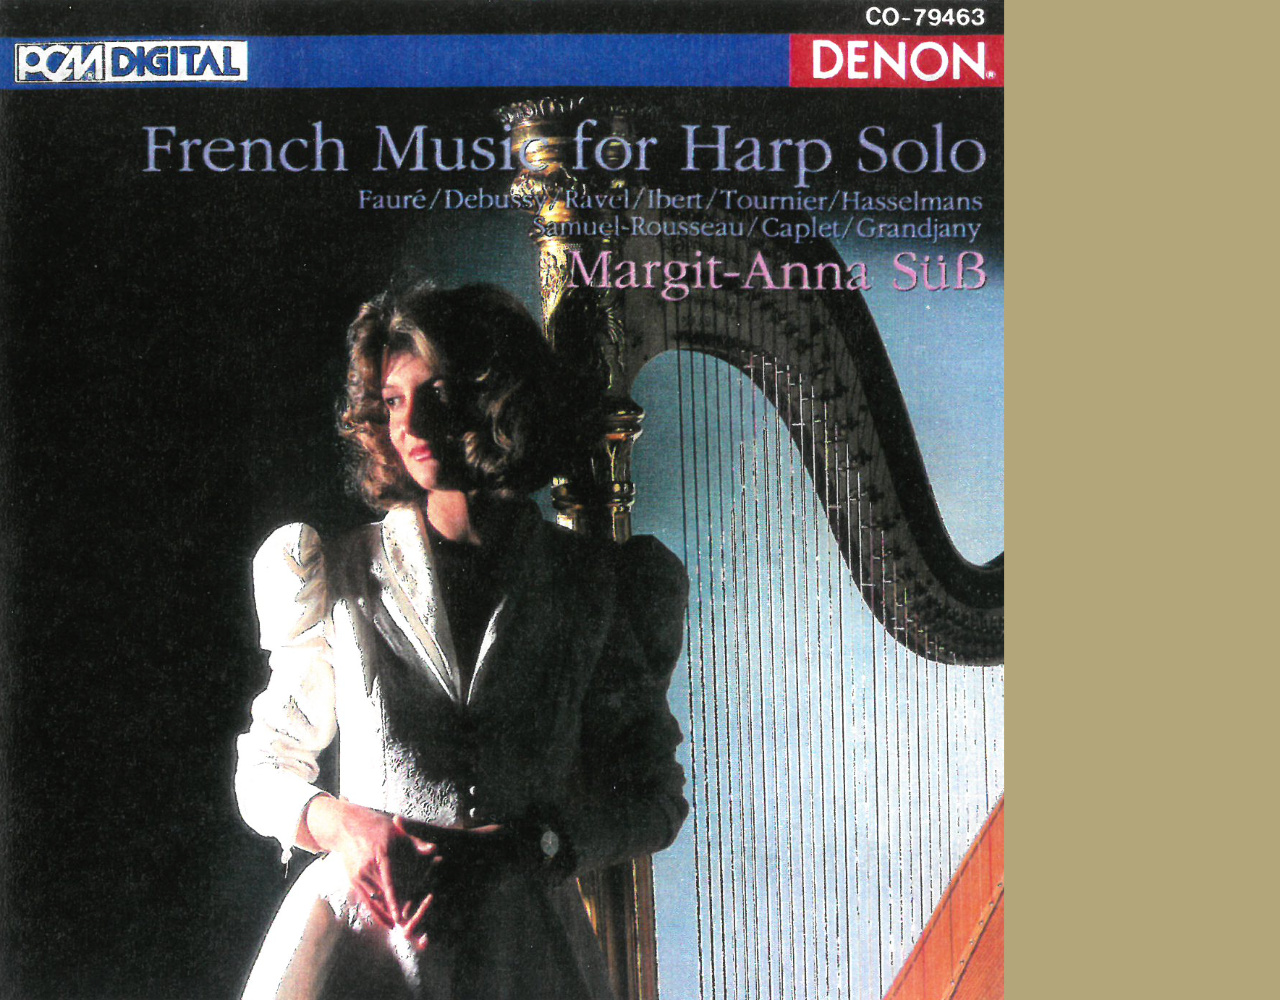 French Music for Harp solo